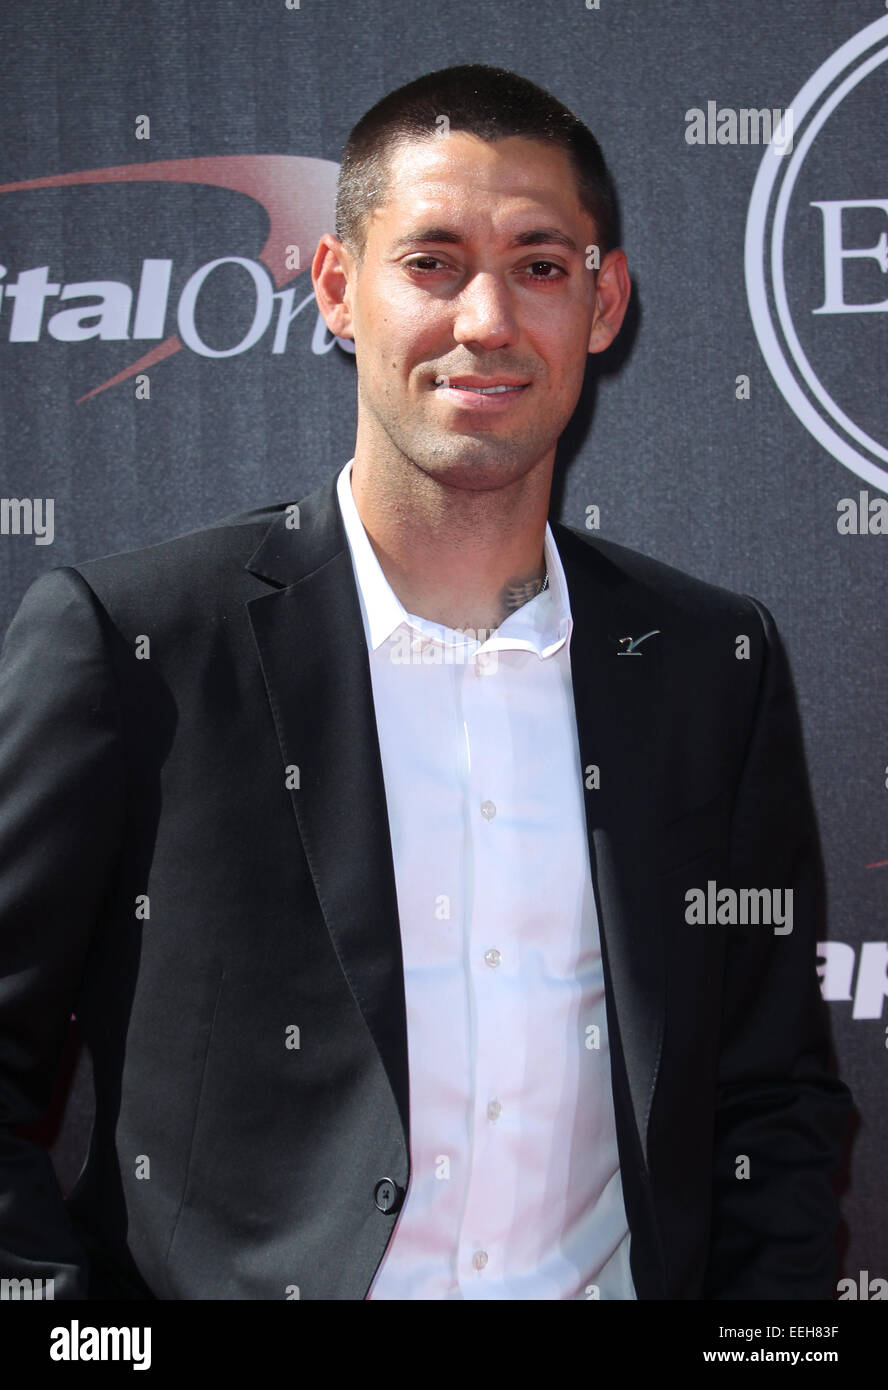 2014 ESPYS Awards - Arrivals  Featuring: Clint Dempsey Where: Los Angeles, California, United States When: 16 Jul 2014 Stock Photo